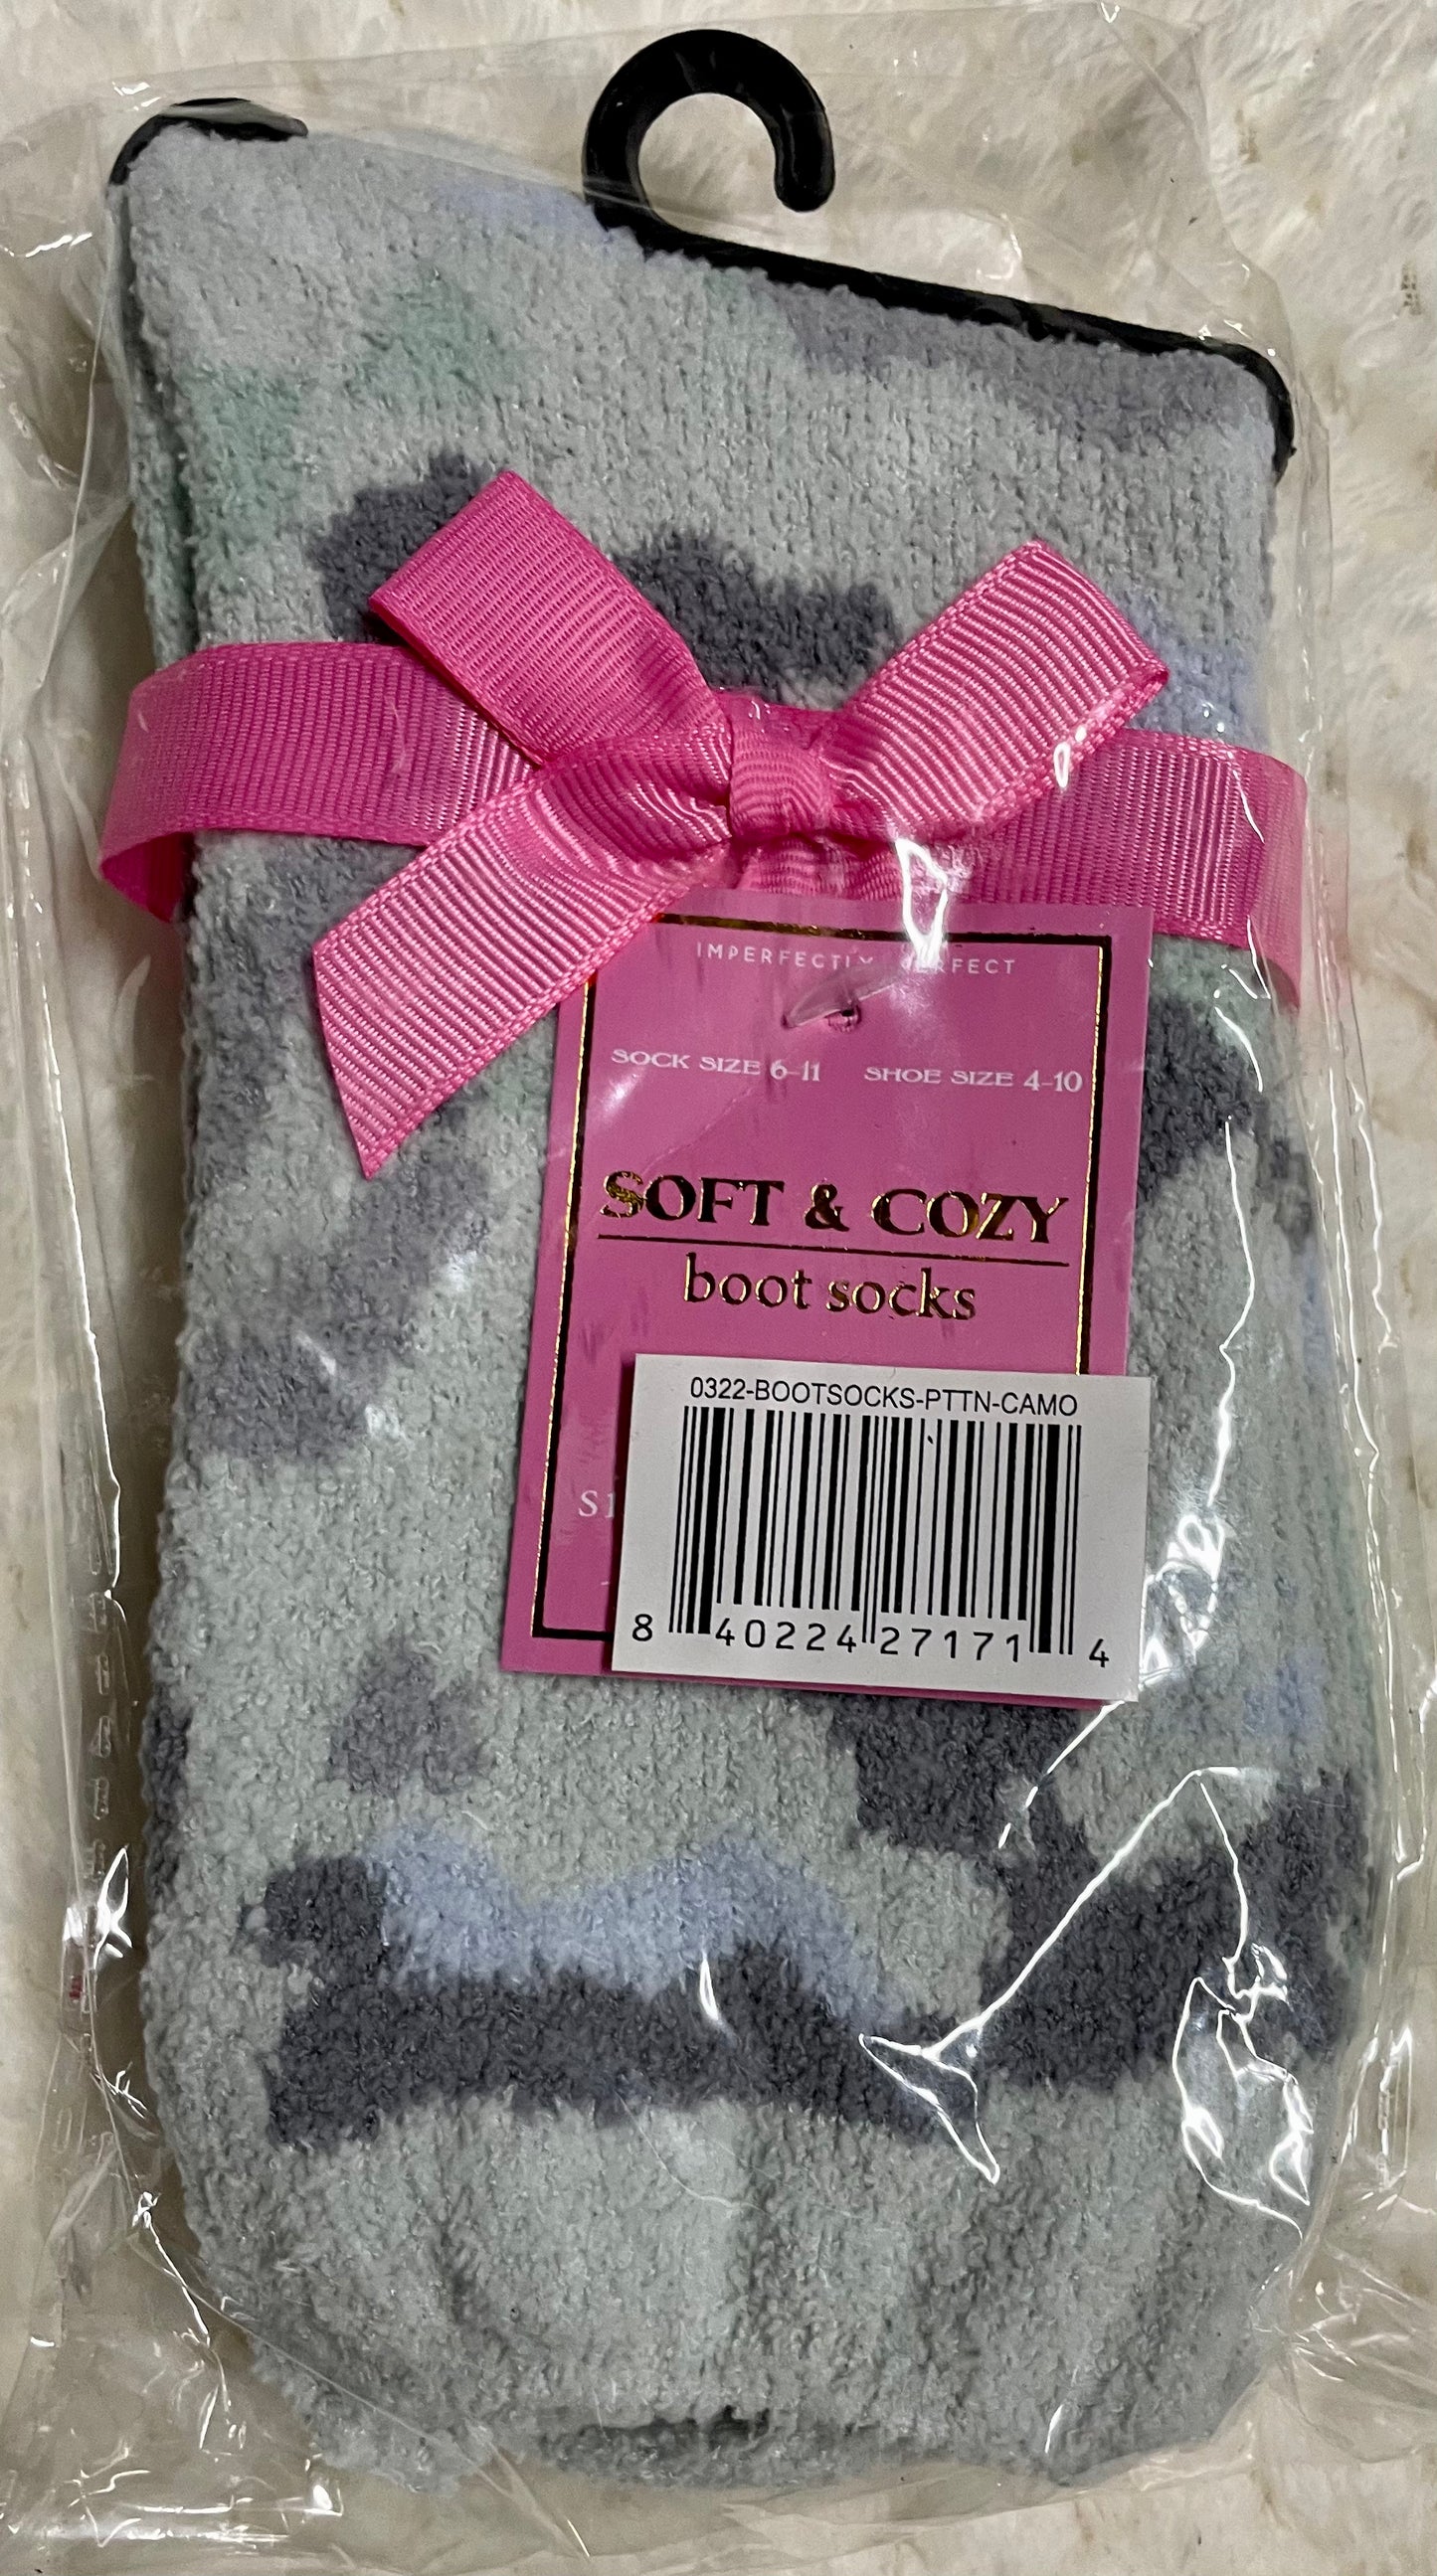 Fuzzy Bootsocks Simply Southern